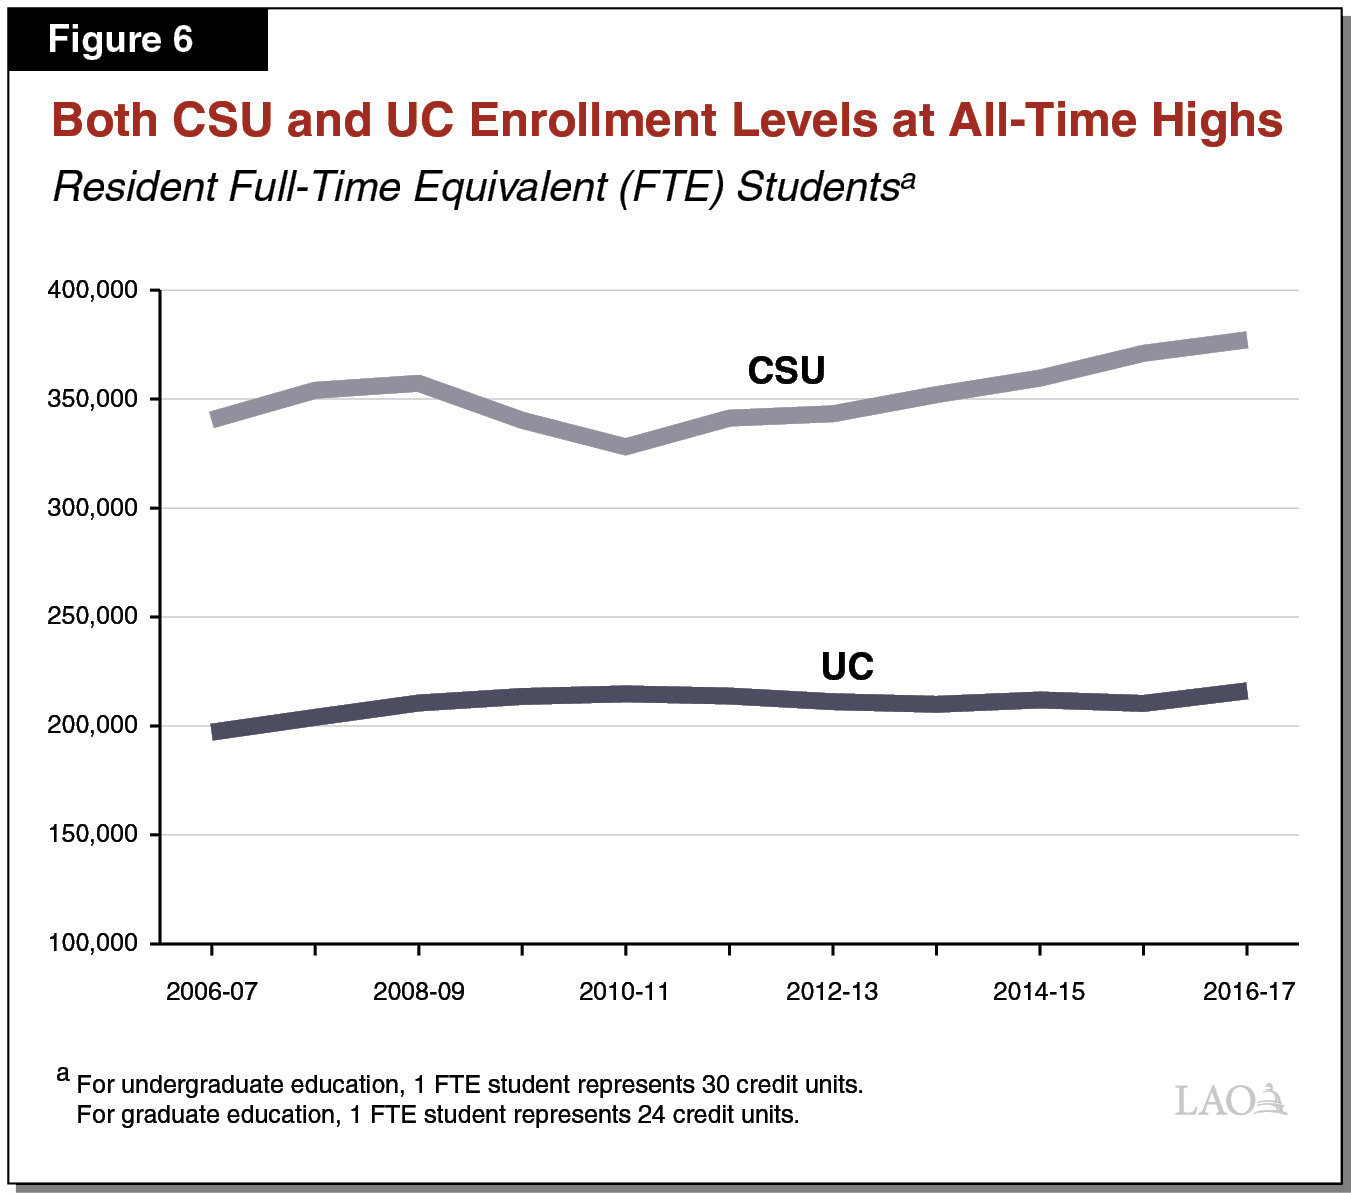 Figure 6 - Both CSU and UC Enrollment Levels at All-Time Highs